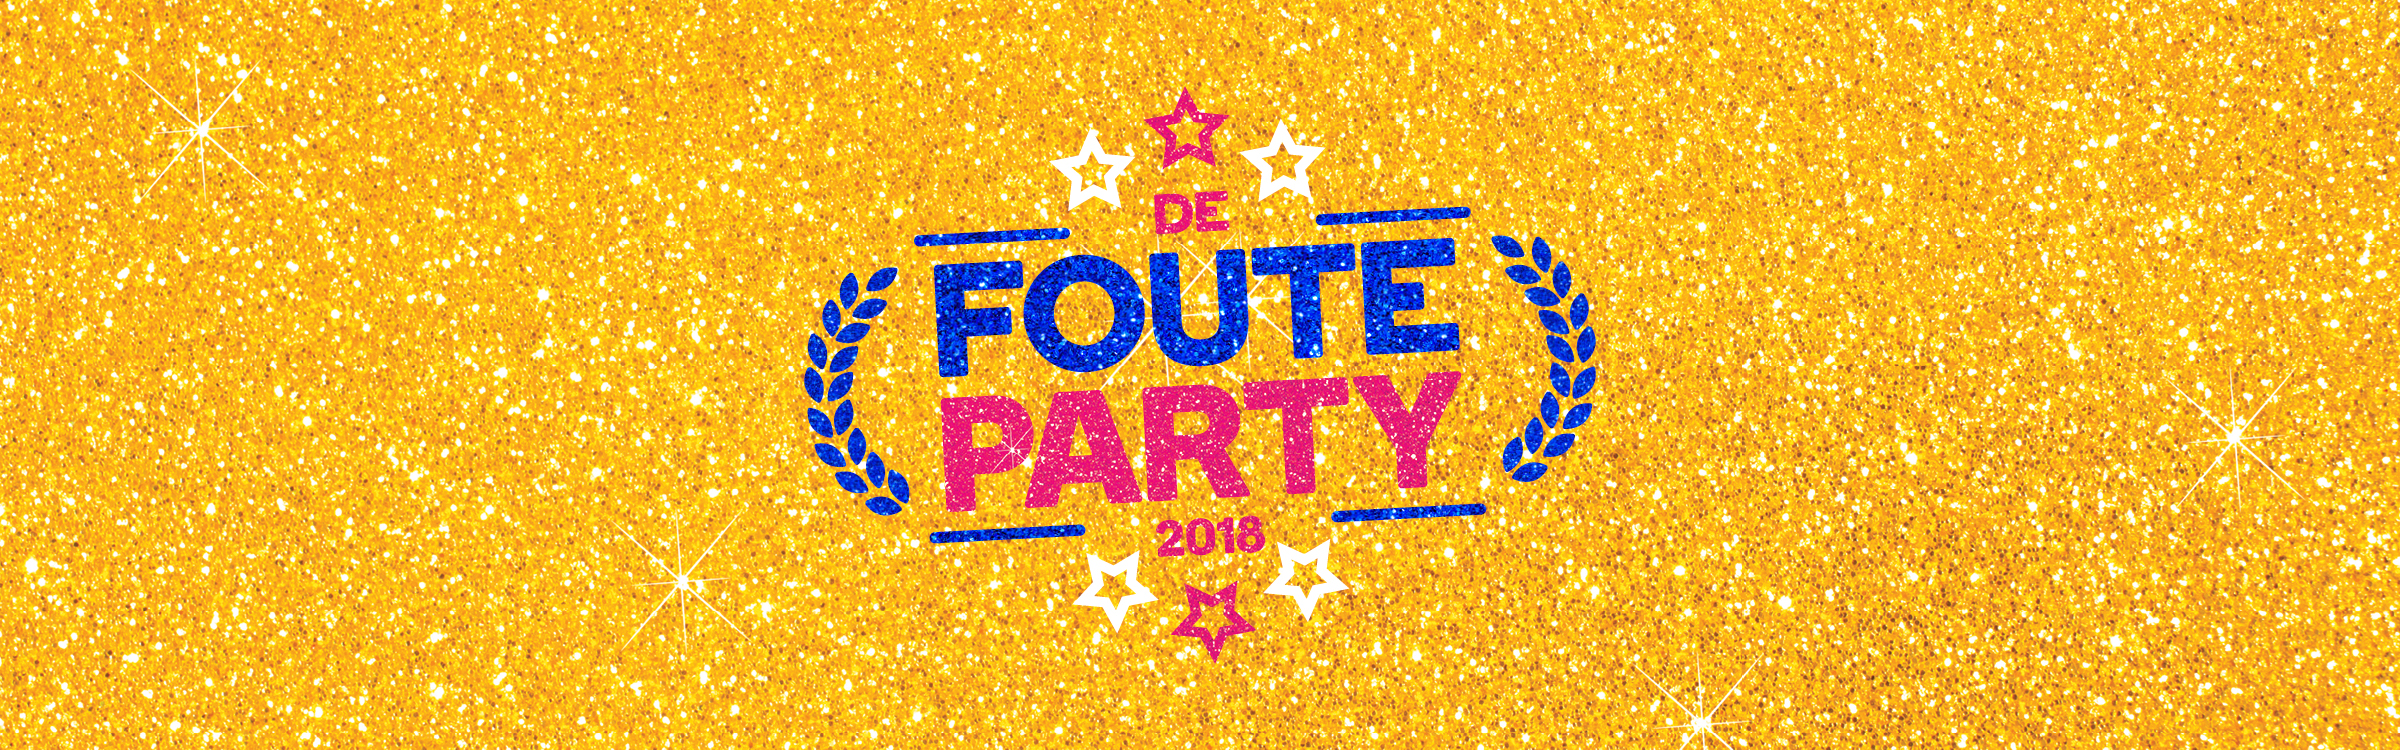 Foute party 2400x750